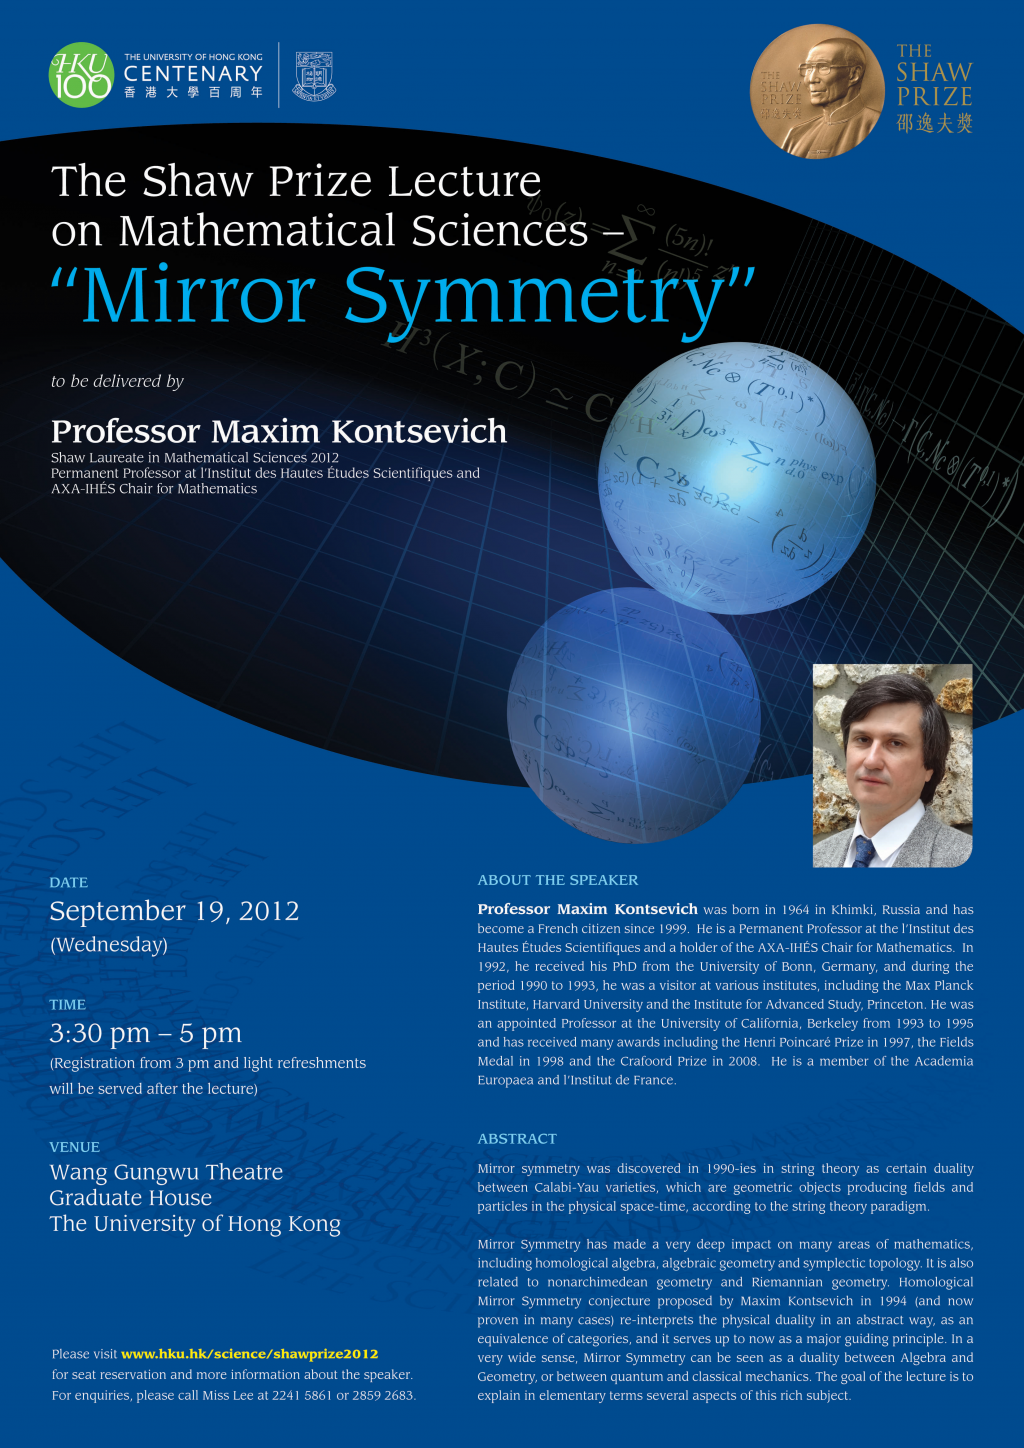 The Shaw Prize Lecture on Mathematical Sciences - 